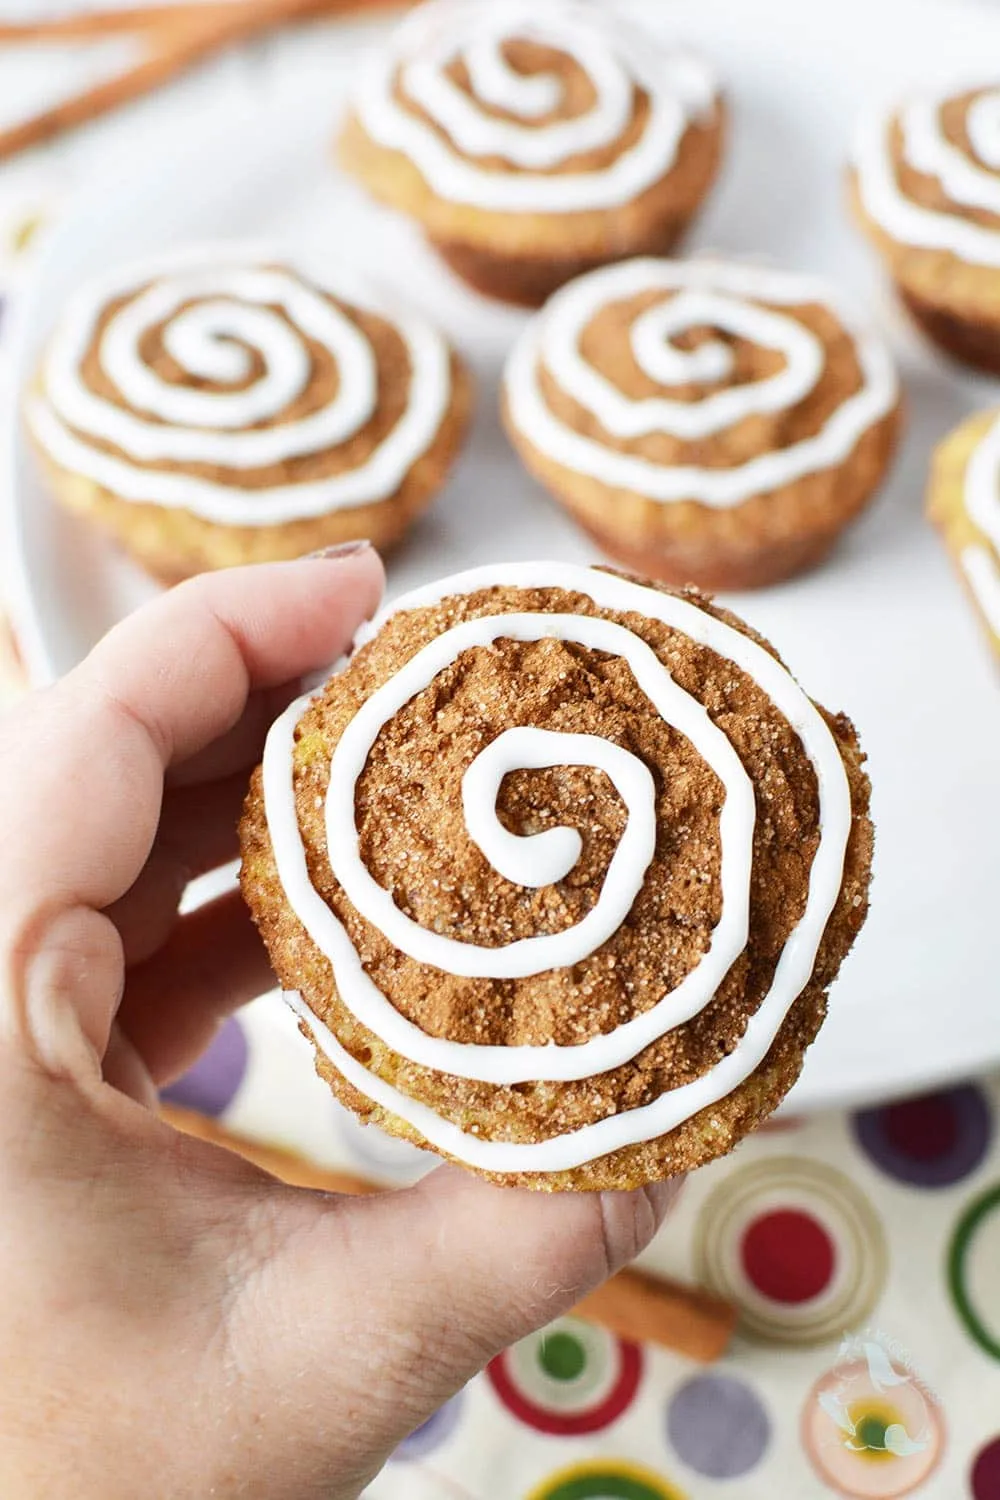 Holding a cinnamon roll muffin up to get a closer look of the glaze topping. 